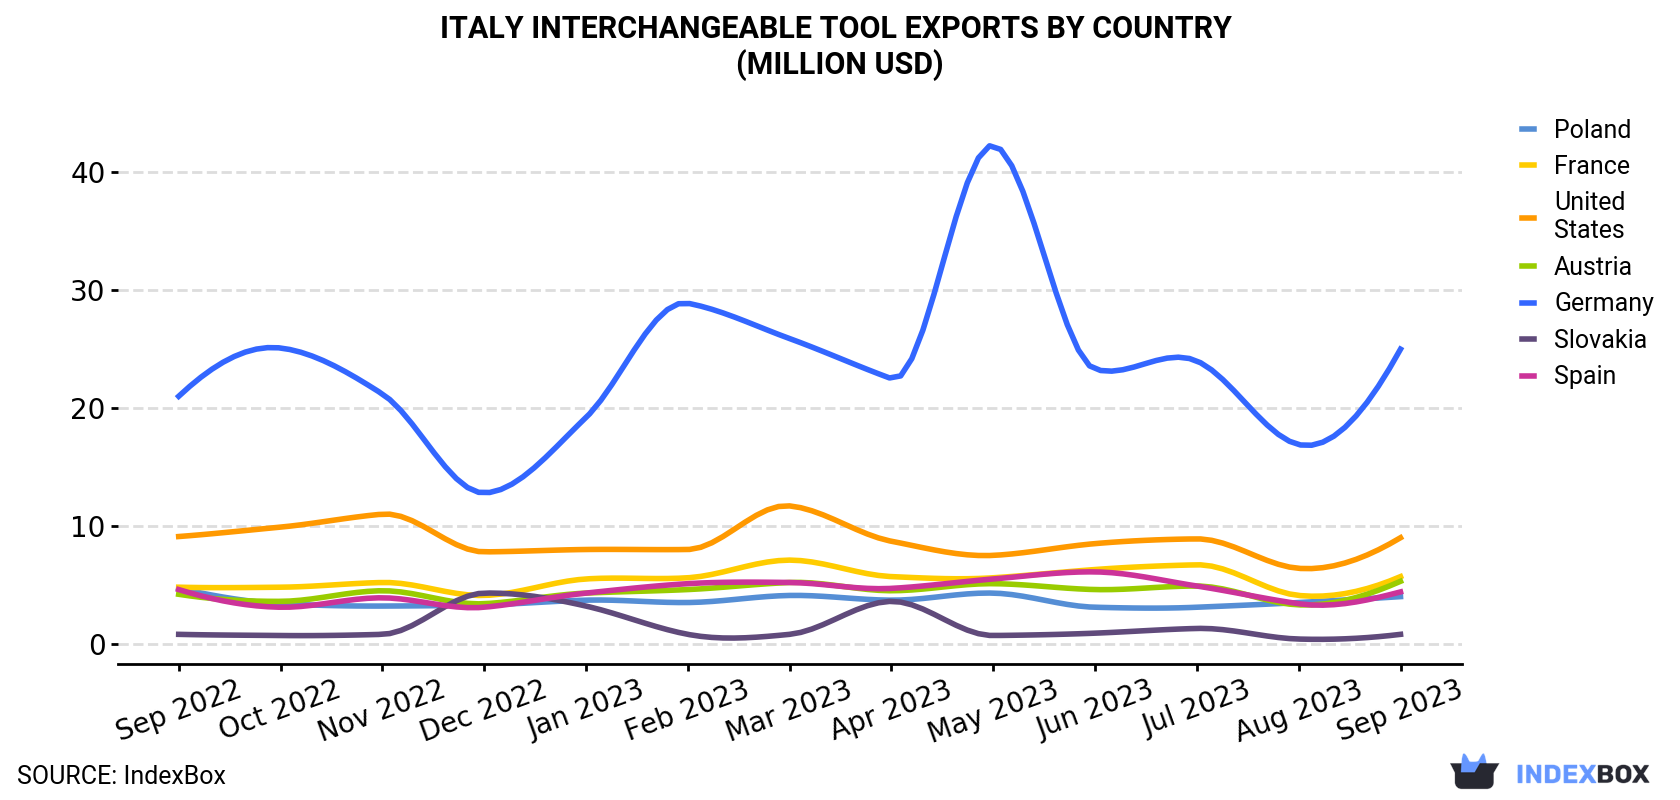 Italy Interchangeable Tool Exports By Country (Million USD)